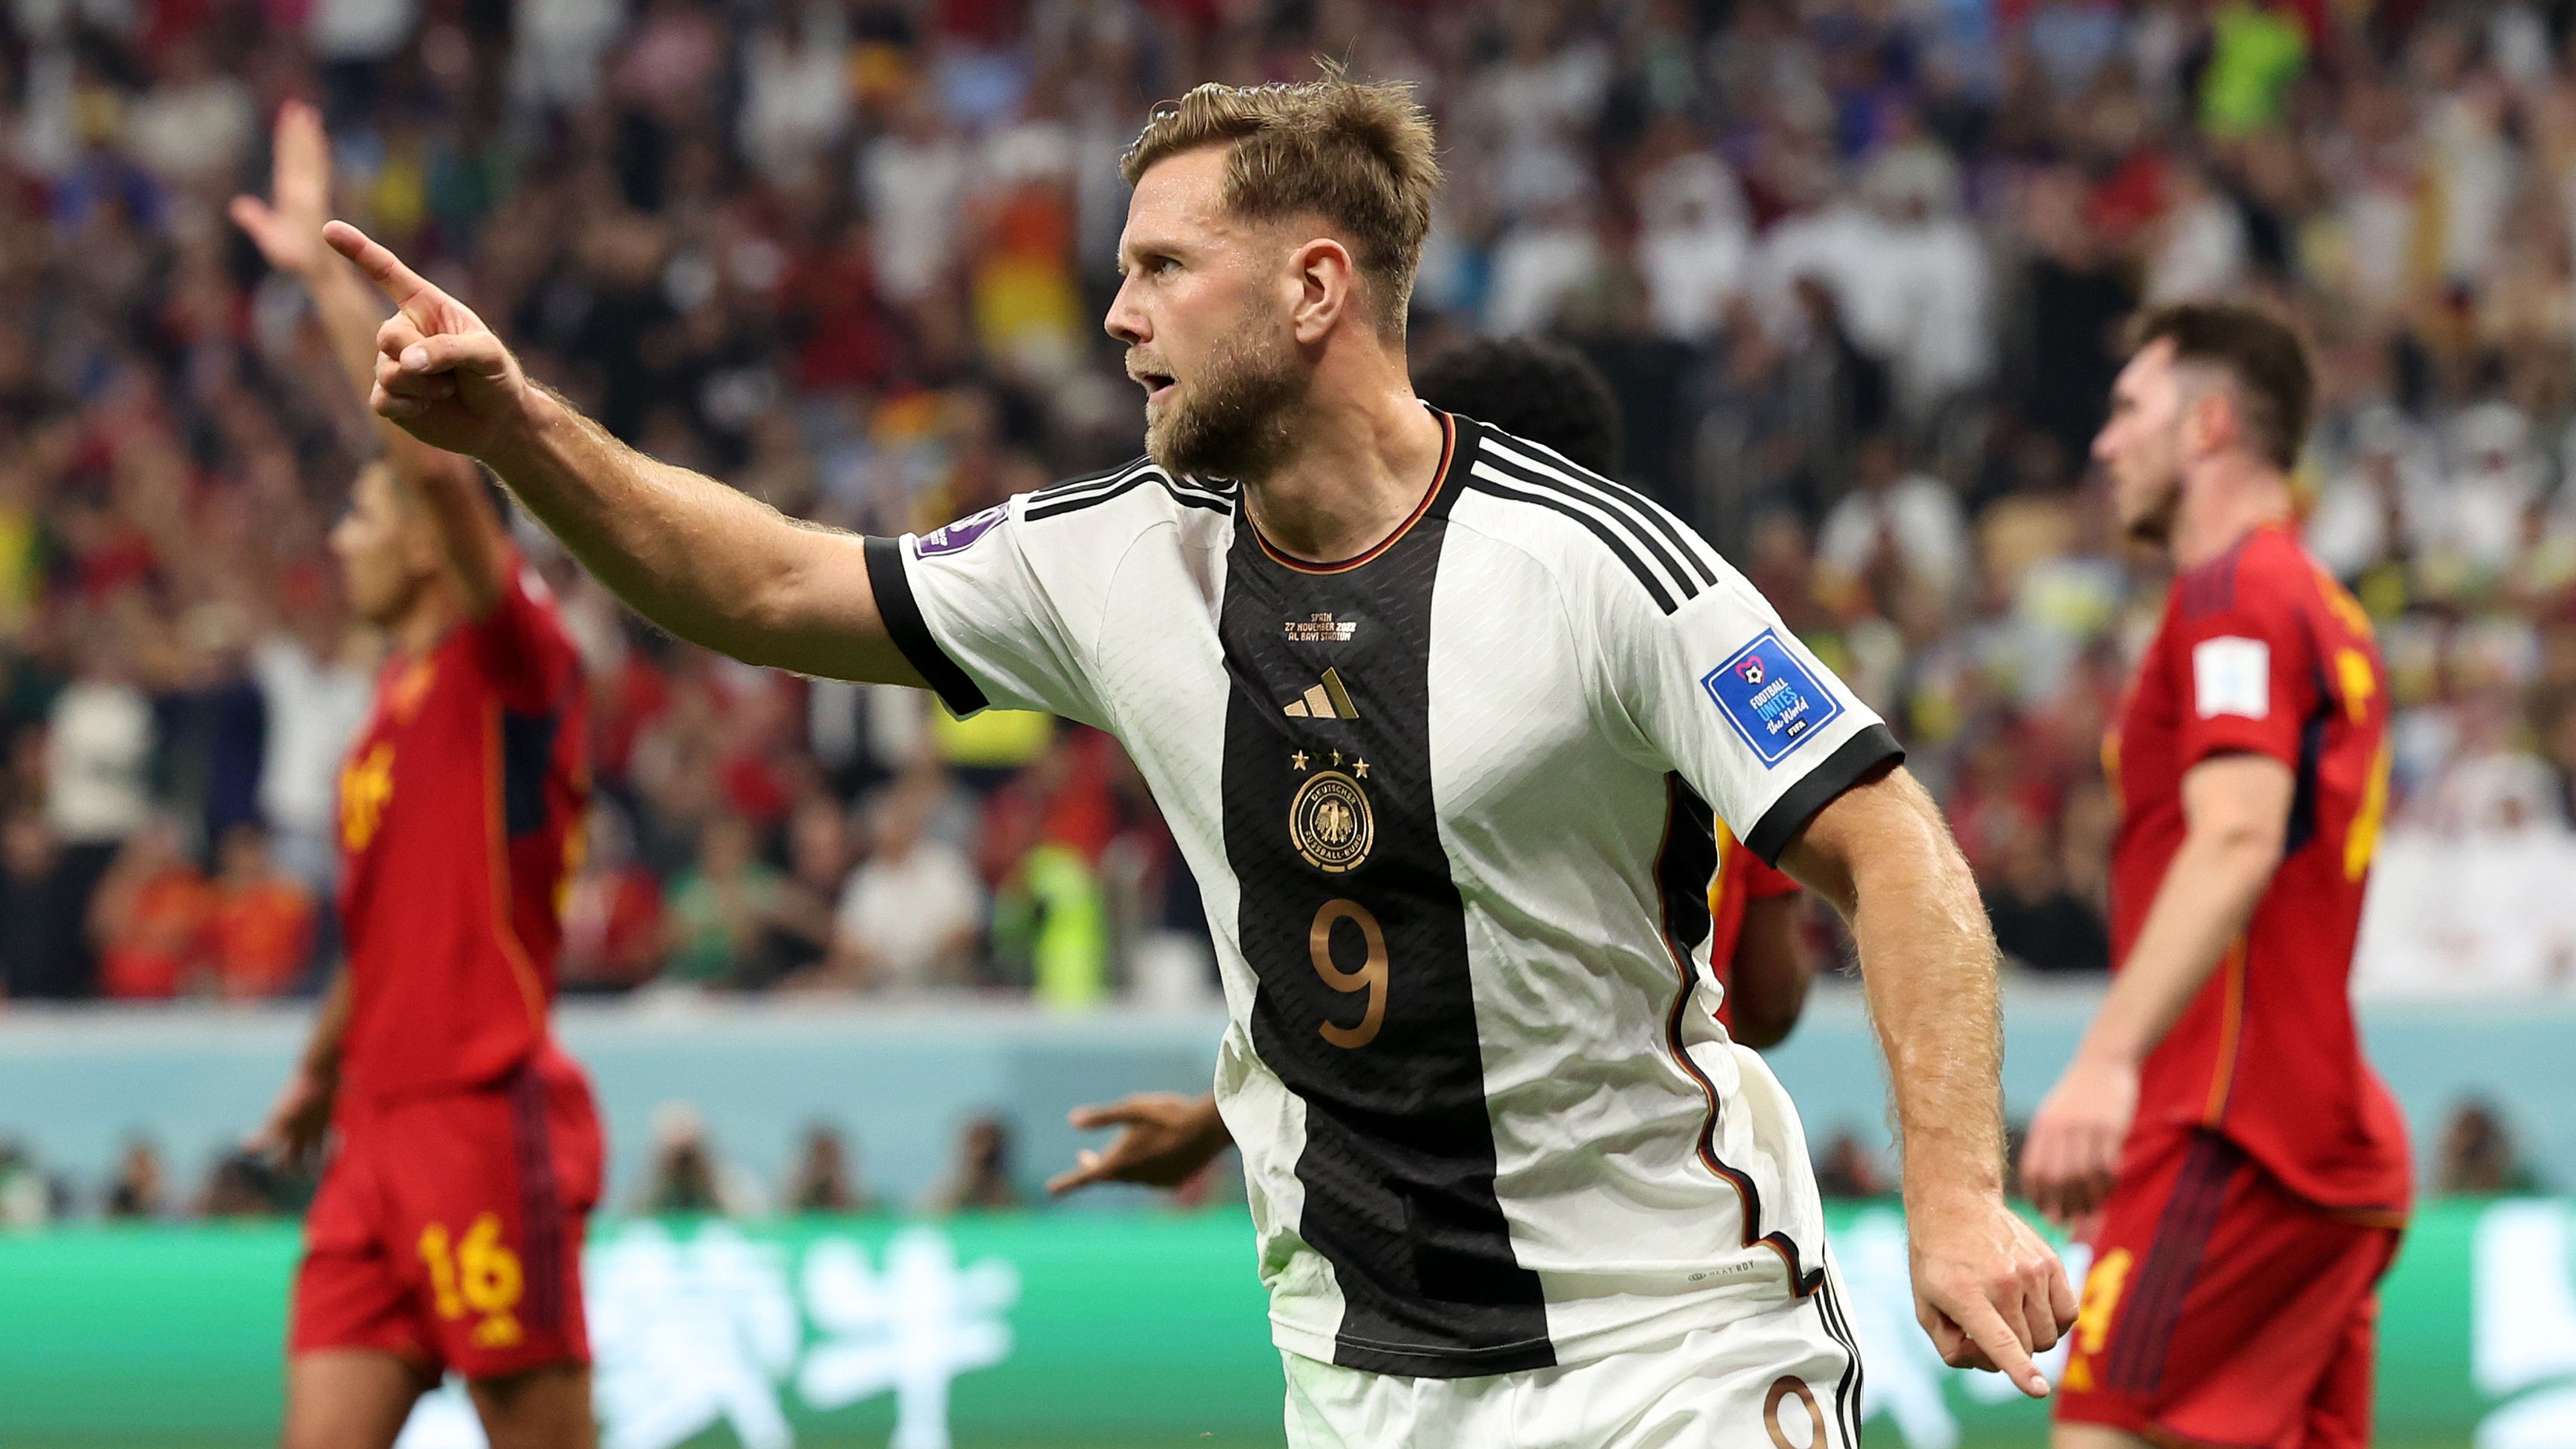 AL KHOR, QATAR - NOVEMBER 27: Niclas Fuellkrug of Germany celebrates after scoring their team&#x27;s first goal during the FIFA World Cup Qatar 2022 Group E match between Spain and Germany at Al Bayt Stadium on November 27, 2022 in Al Khor, Qatar. (Photo by Alexander Hassenstein/Getty Images)